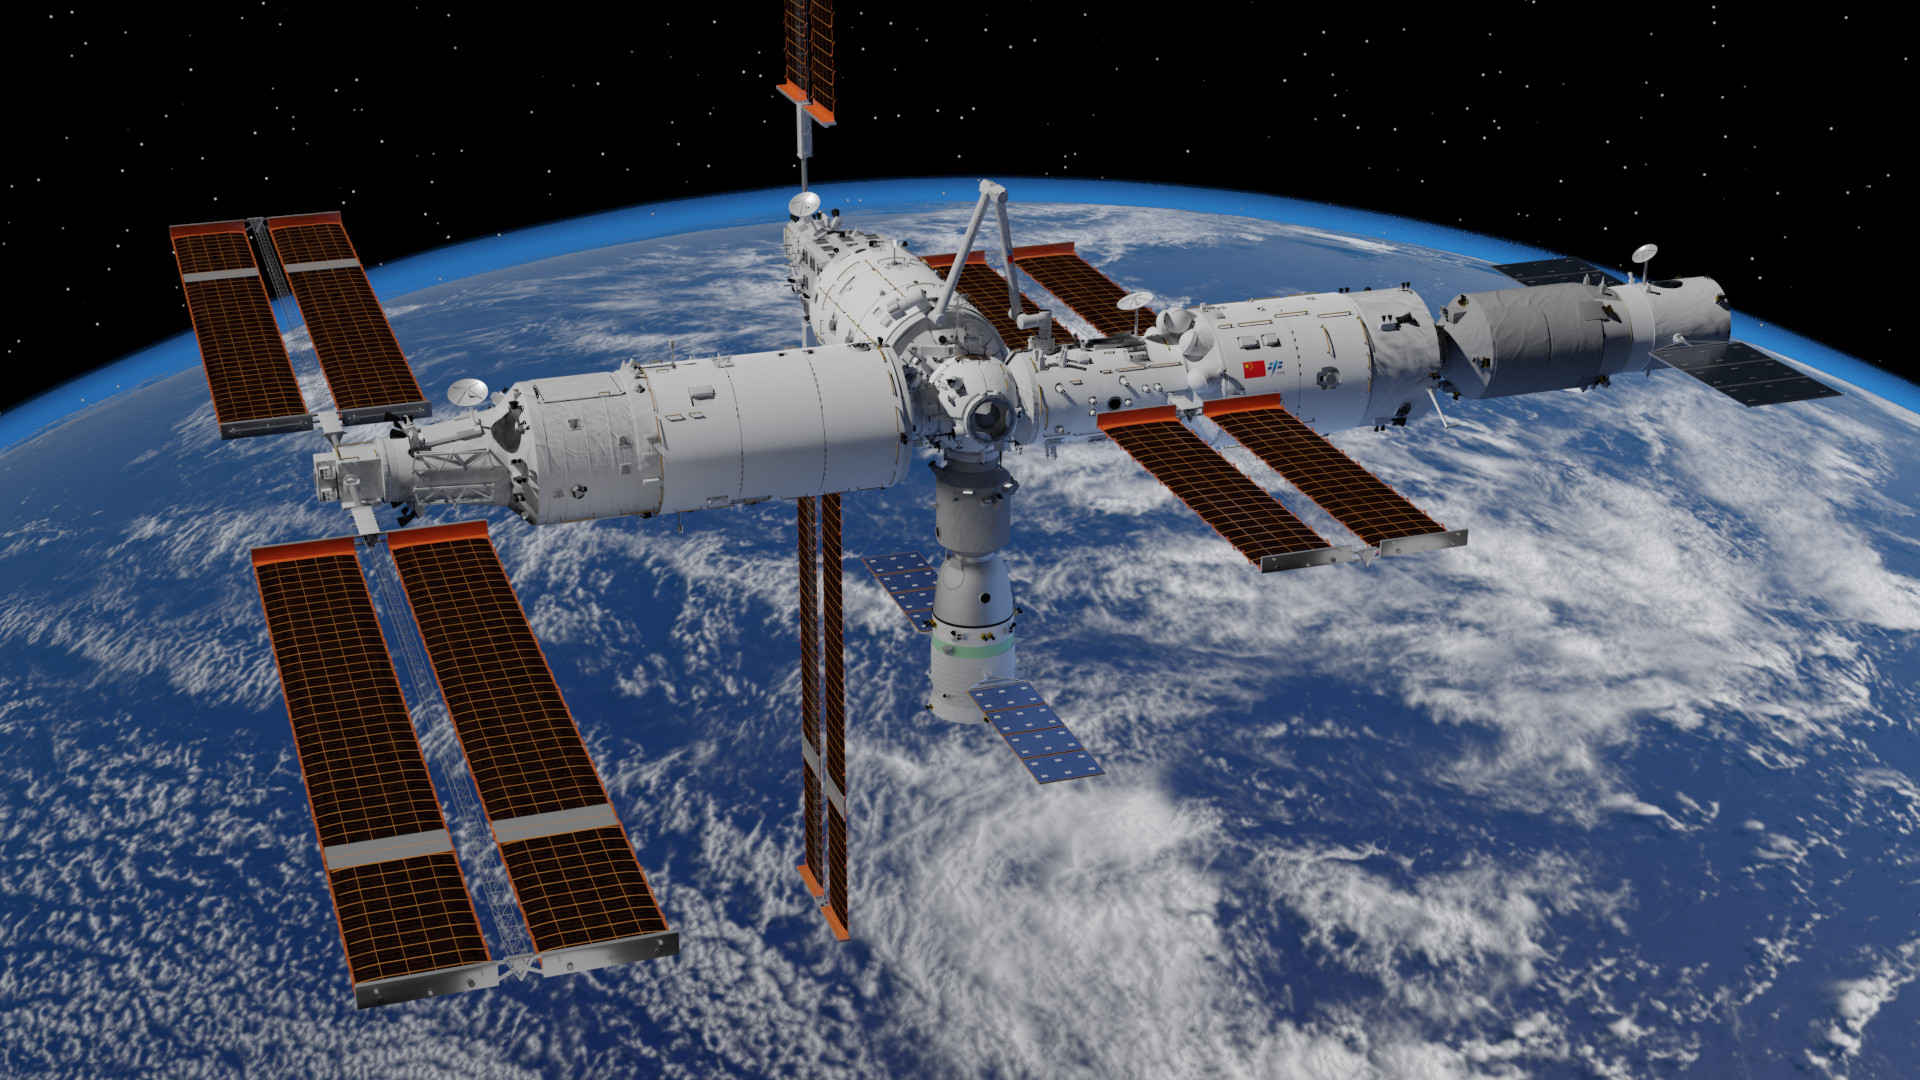 Tiangong space station news